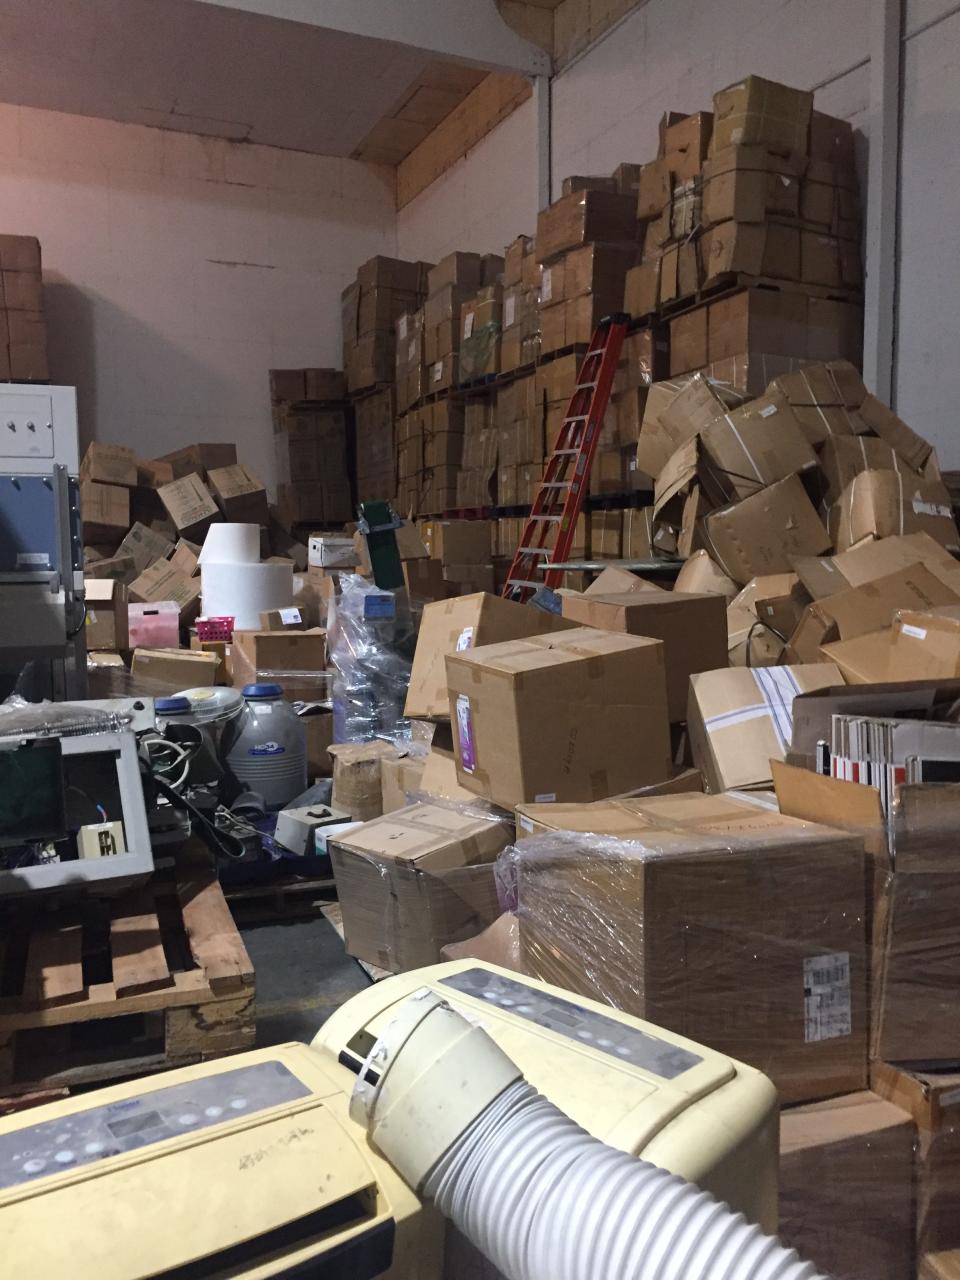 Inside the warehouse in Reedley, California, where furniture, medical devices and other materials were improperly stored.